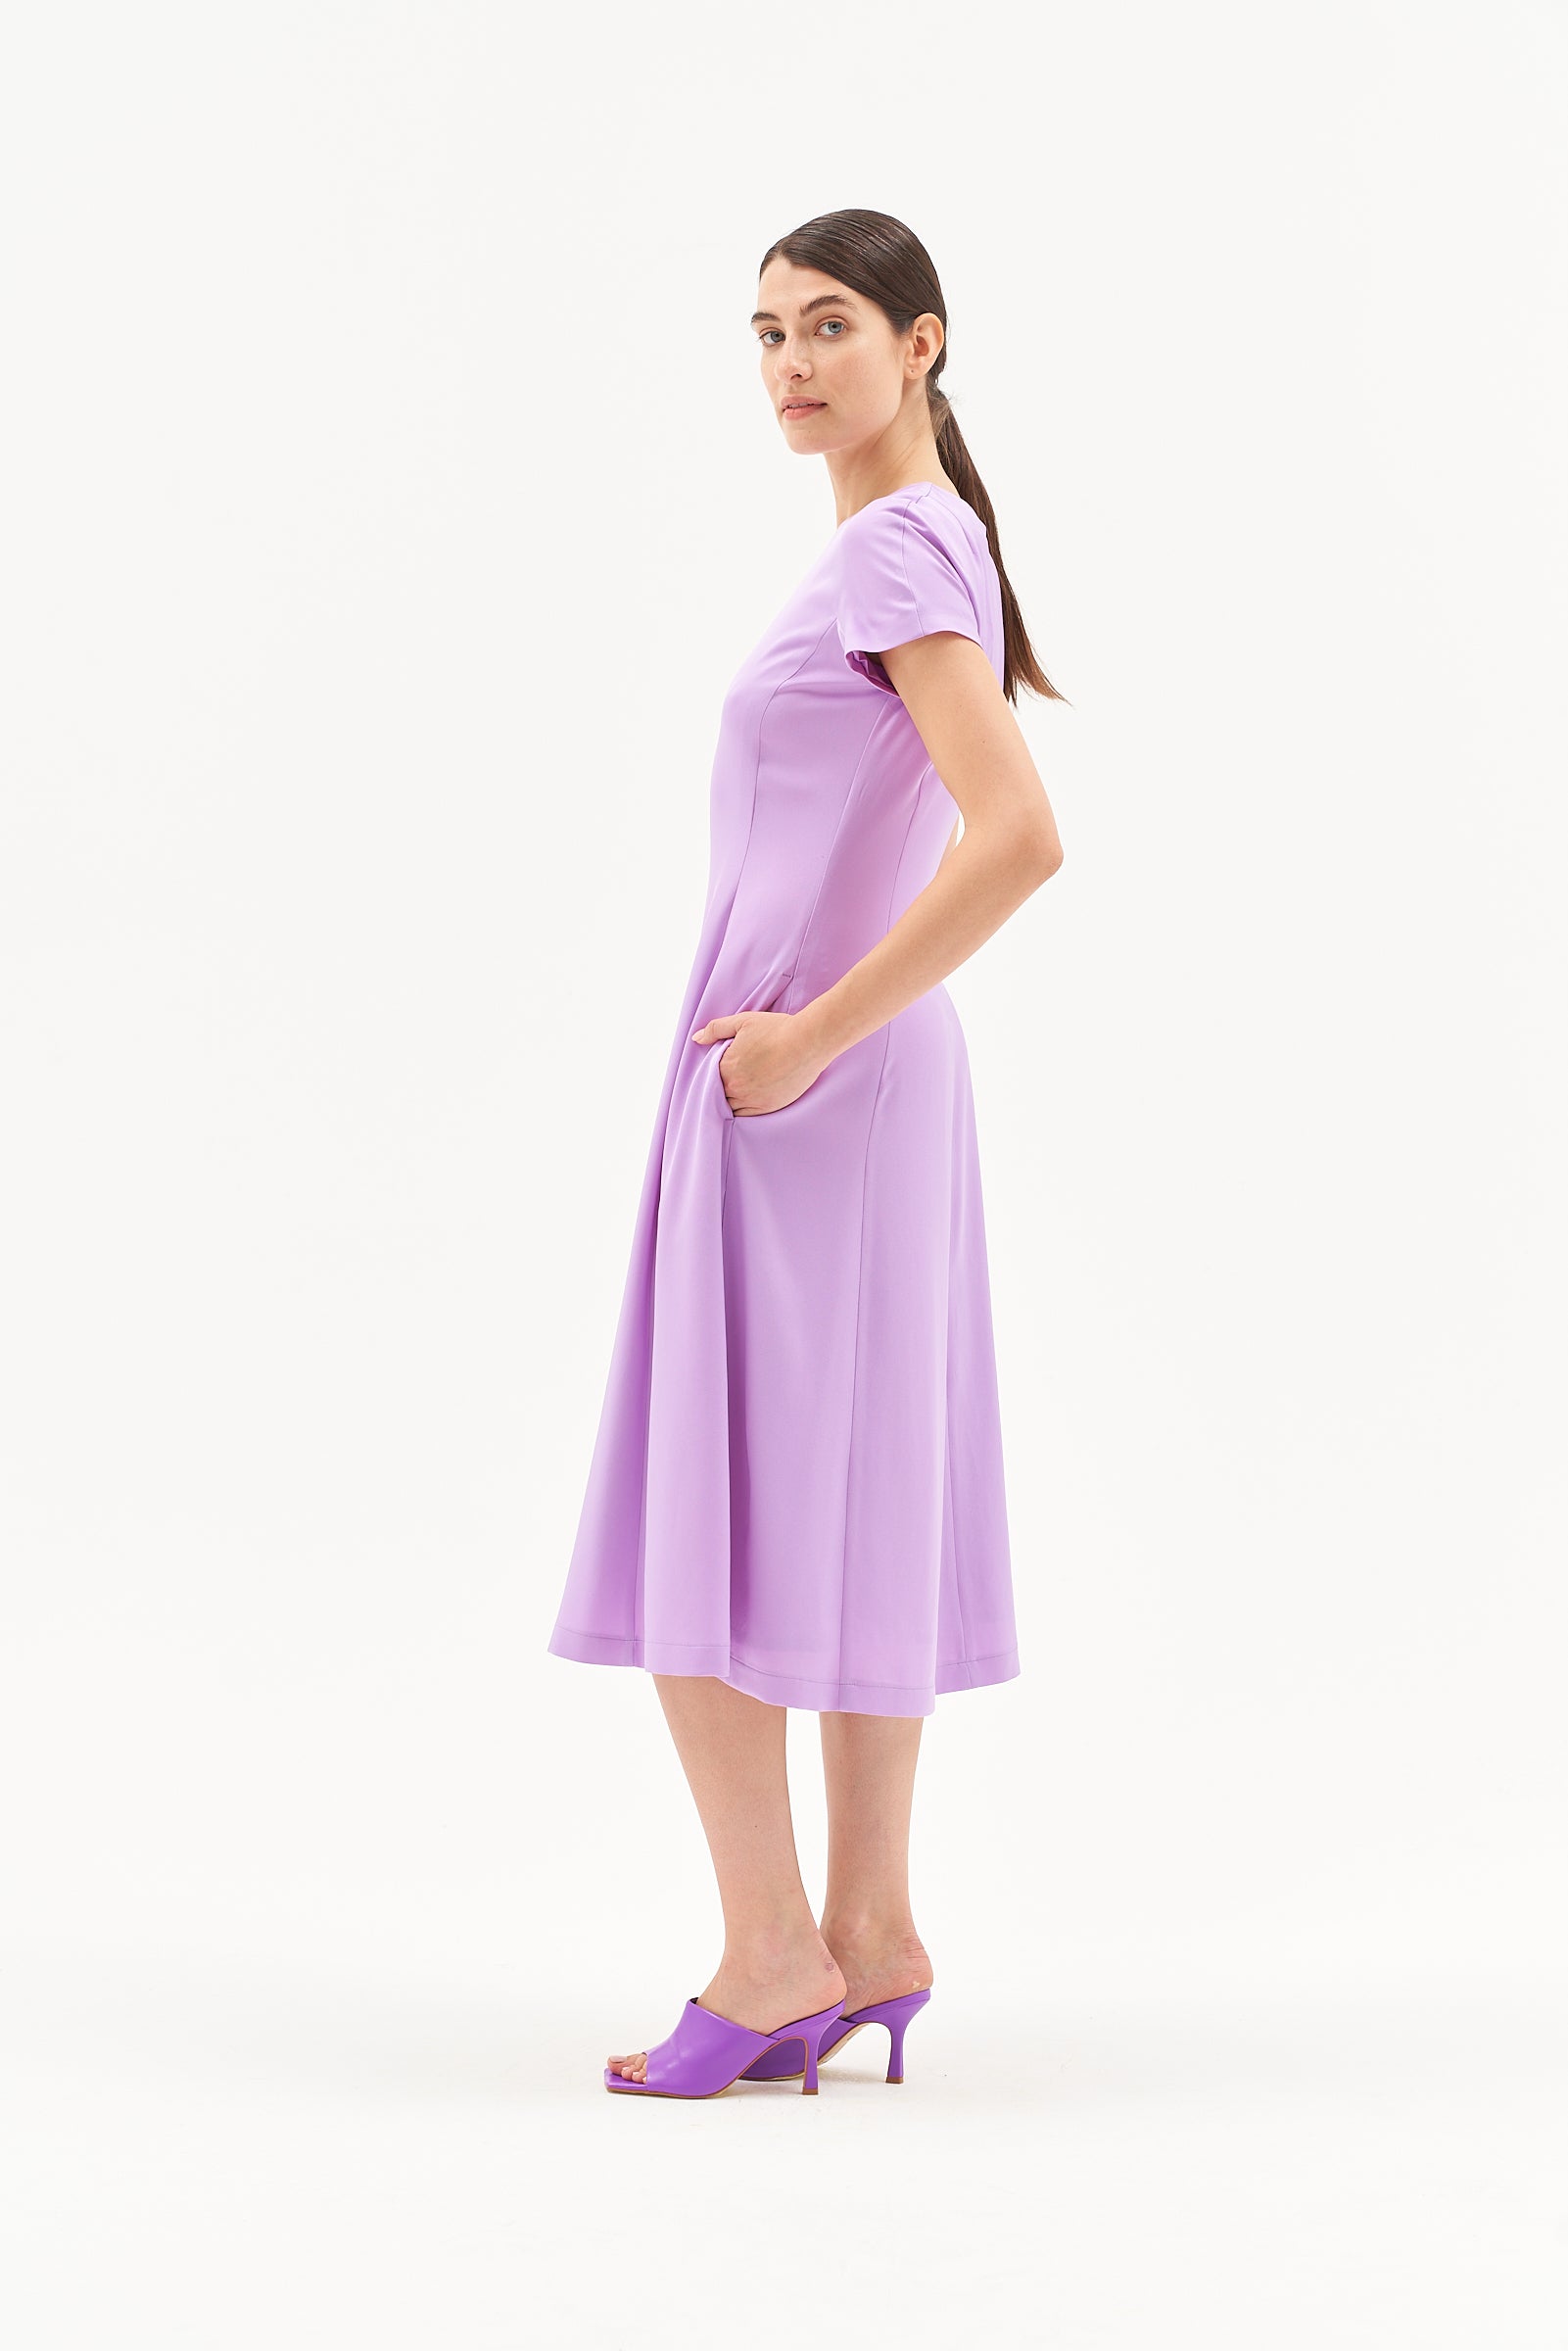 SHORT SLEEVE DRESS IN LILAC